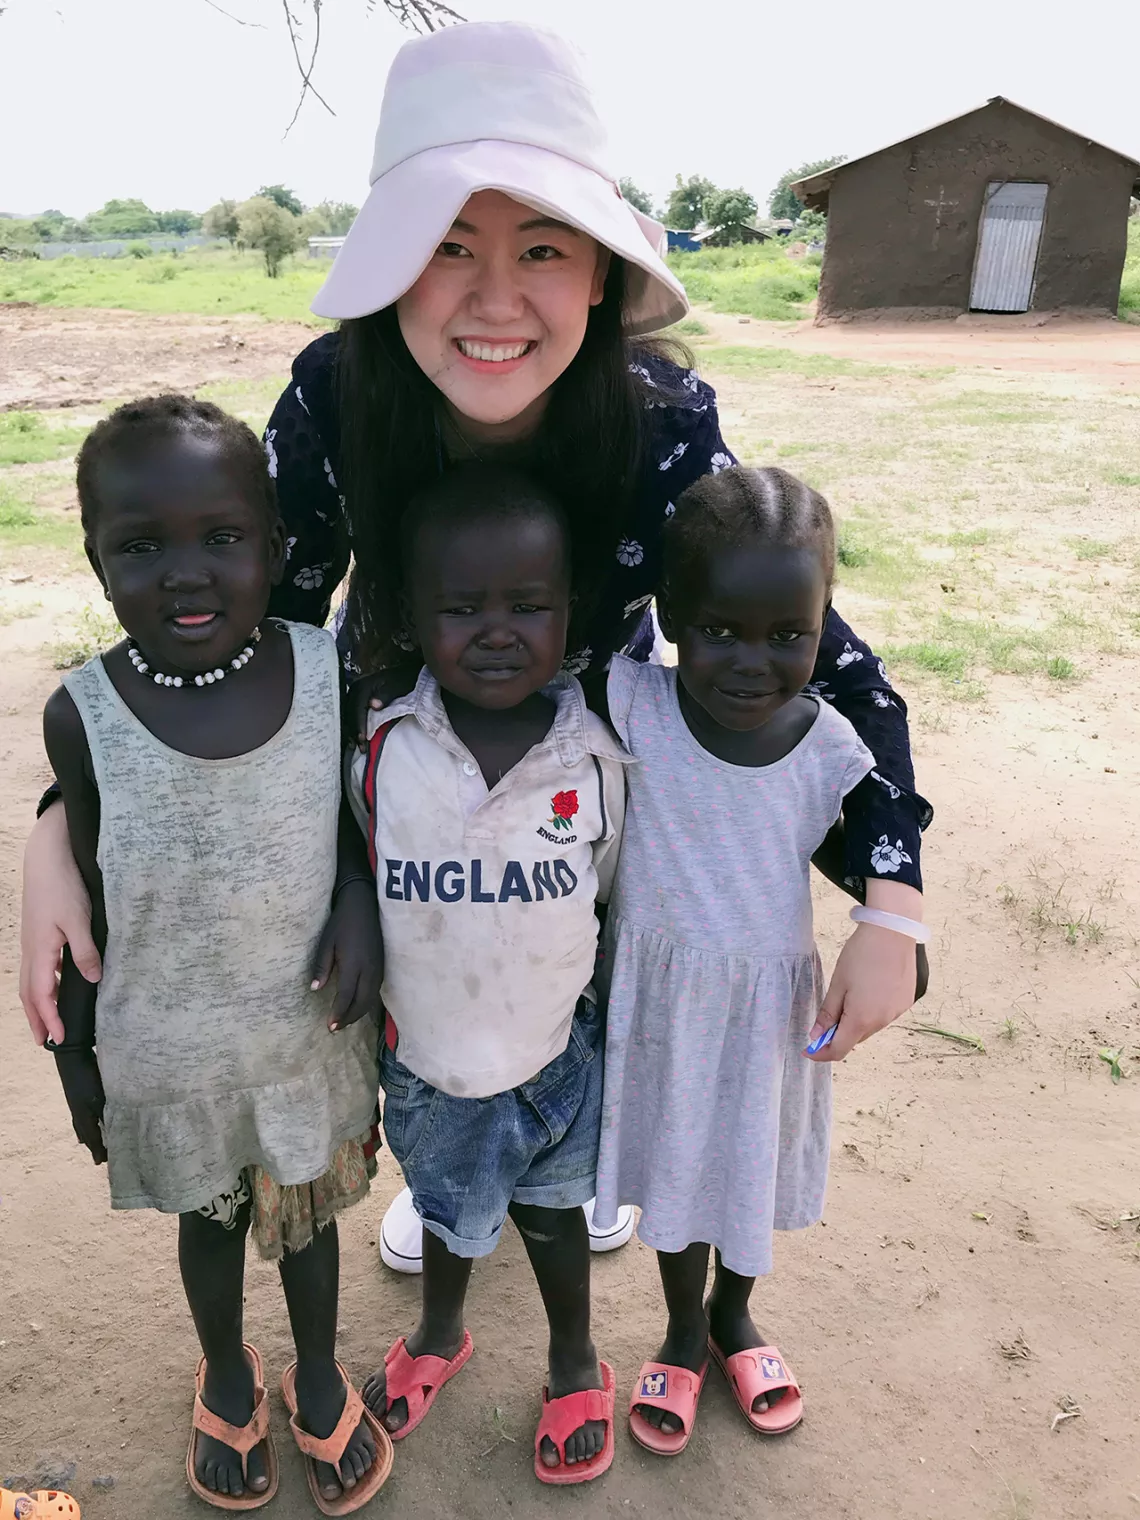 Yiming, an Education Officer on field mission, visits the UNICEF supported pre-primary school in the weapon-free zone close to the Protection of Civilian (PoC) site in Juba, South Sudan.